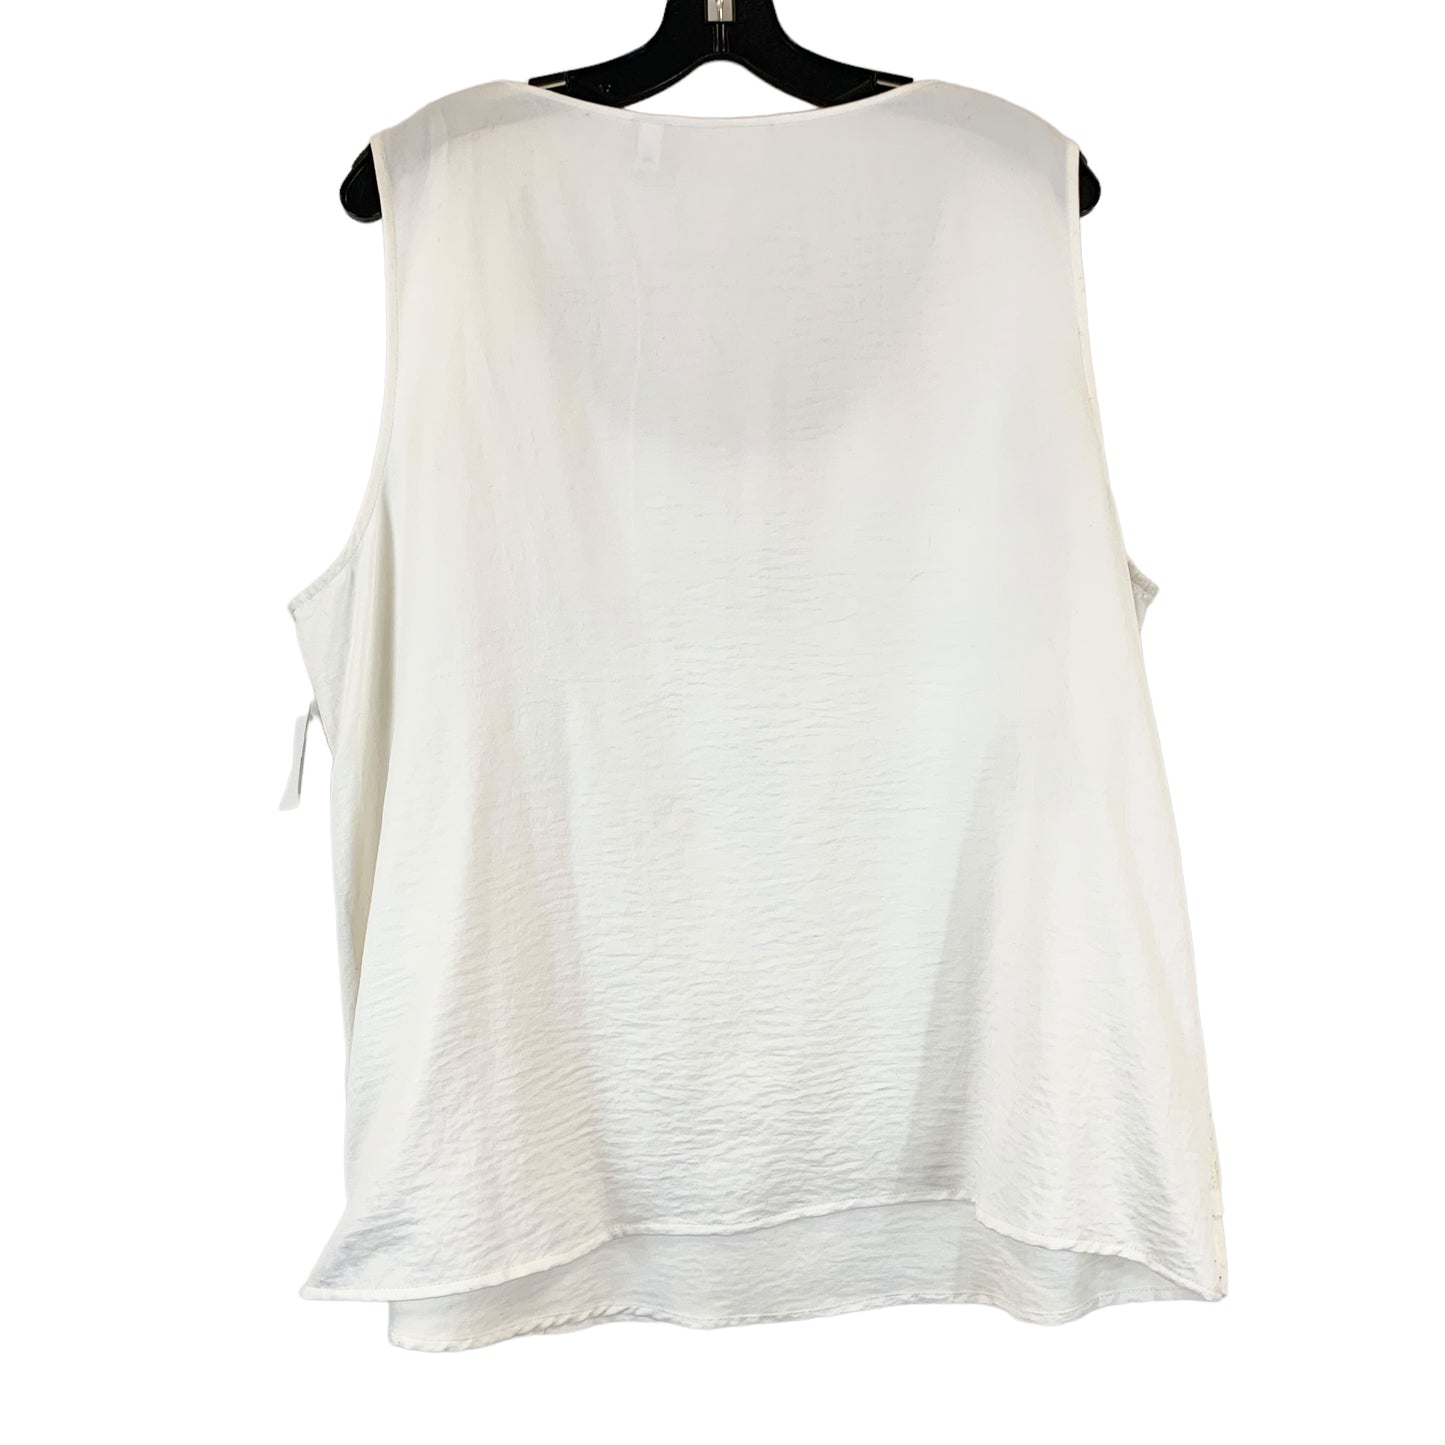 Top Sleeveless Basic By Chicos  Size: XL | 3